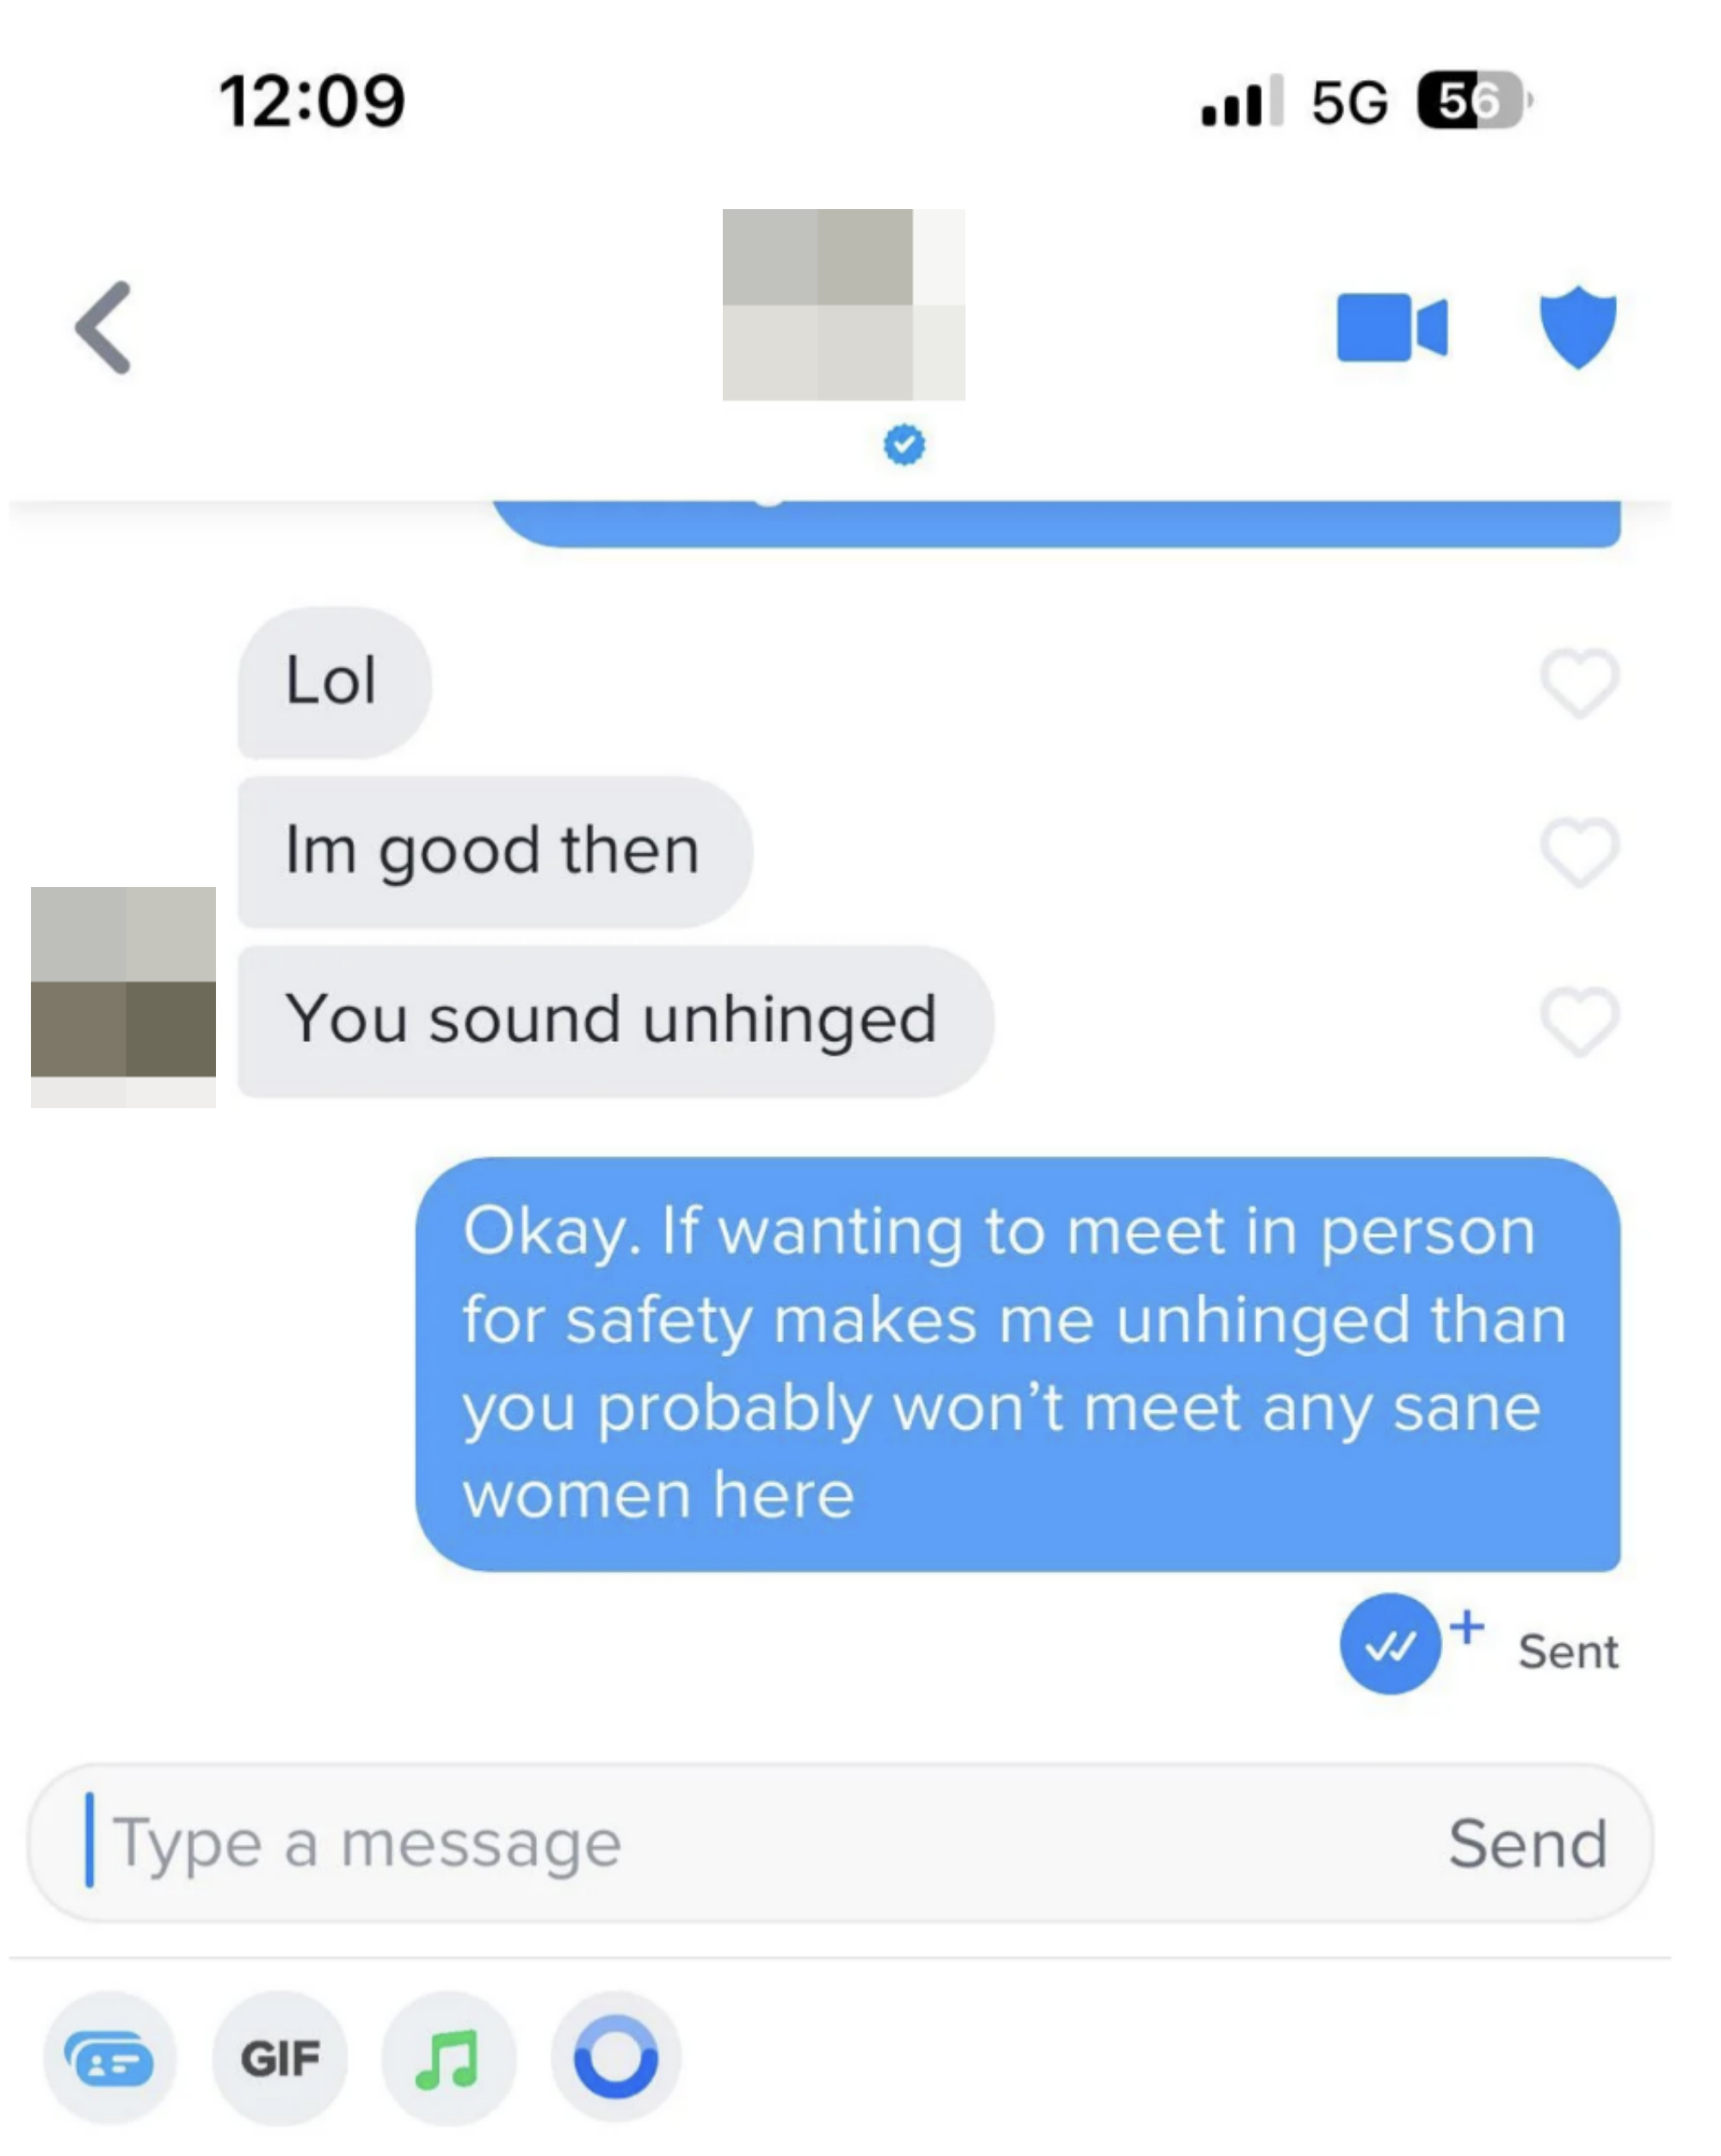 &quot;You sound unhinged&quot;